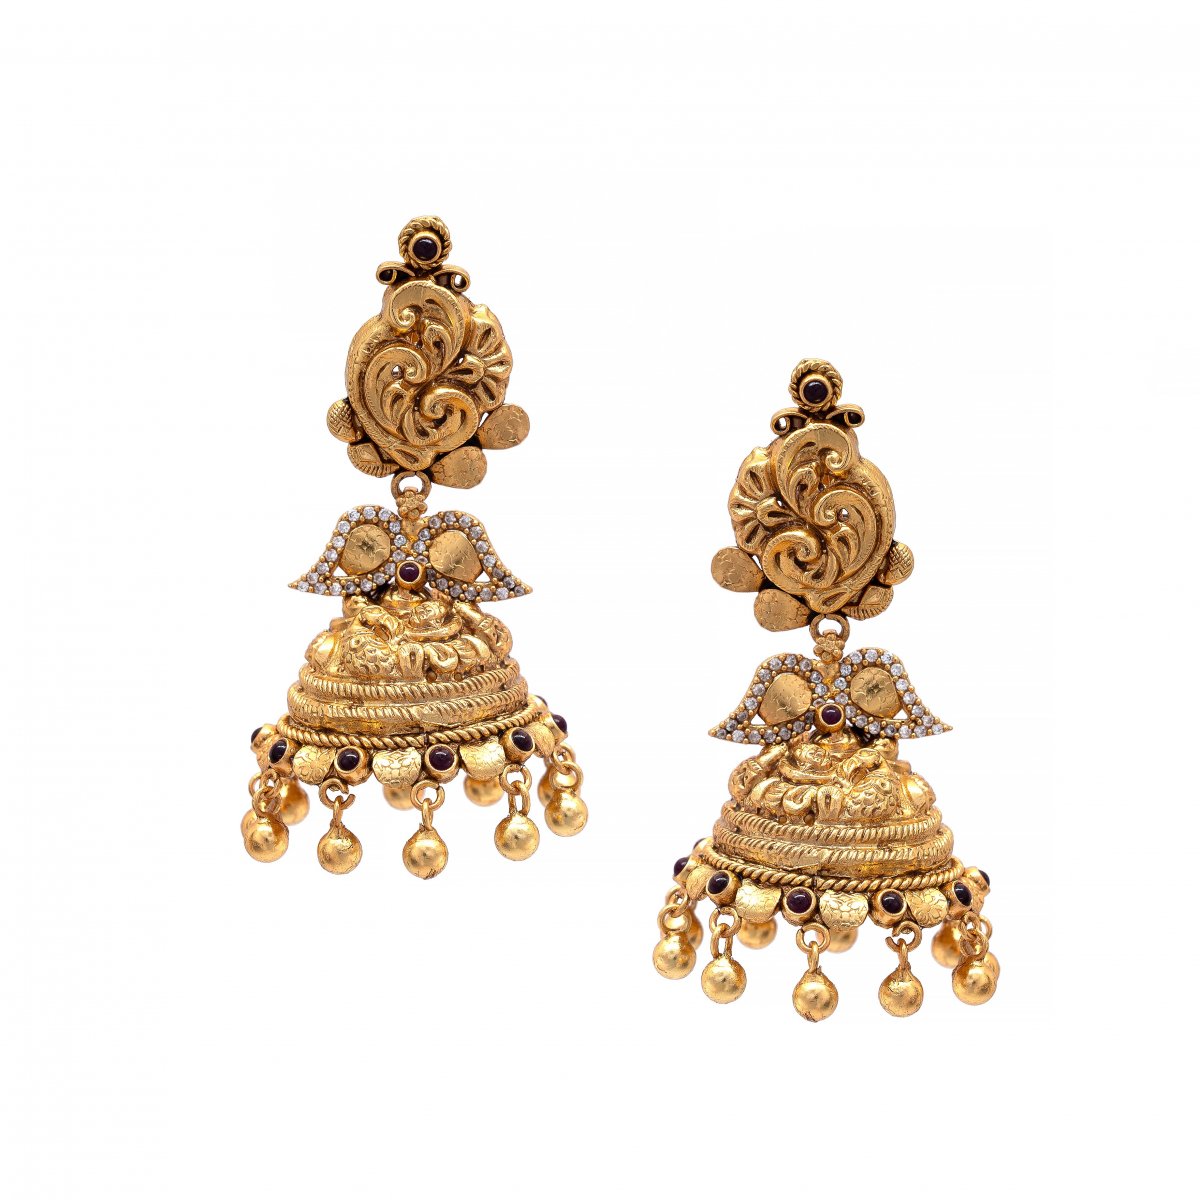 GOLD POLISHED TRADITIONAL TEMPLE NAGAAS JHUMKI IN SILVER